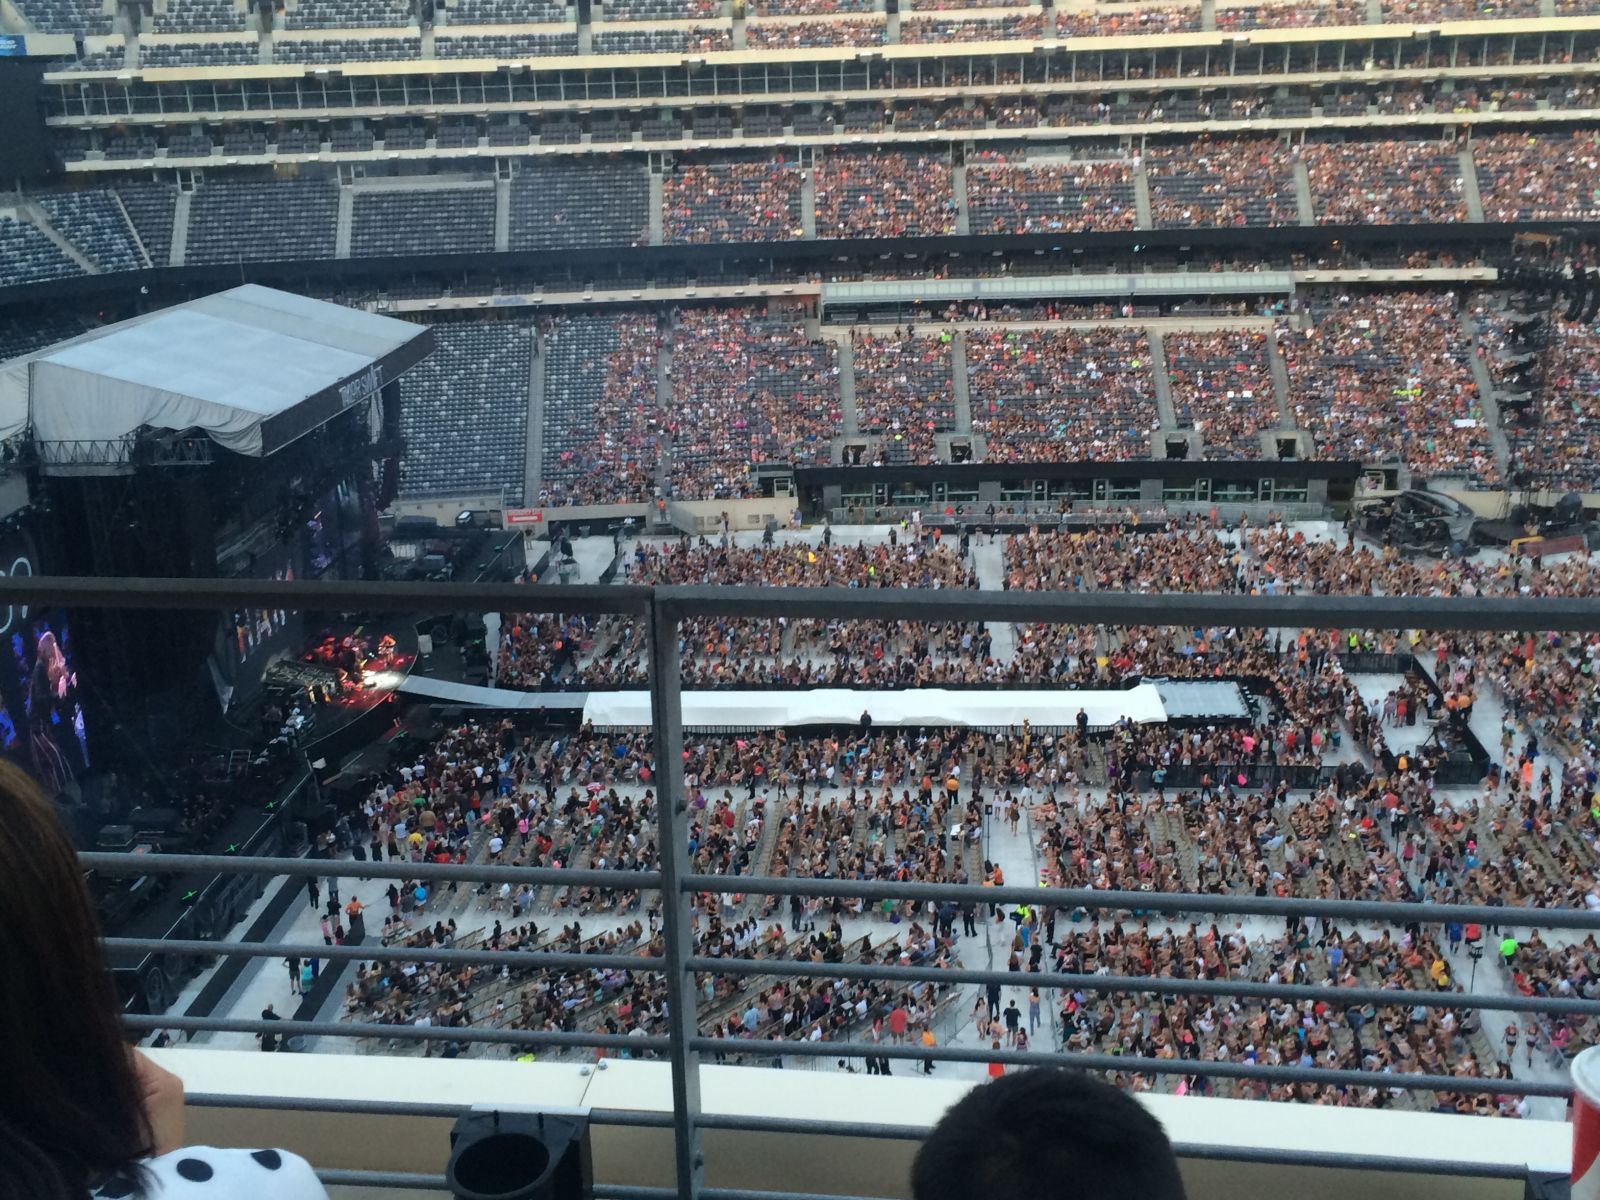 section 339, row 2 seat view  for concert - metlife stadium